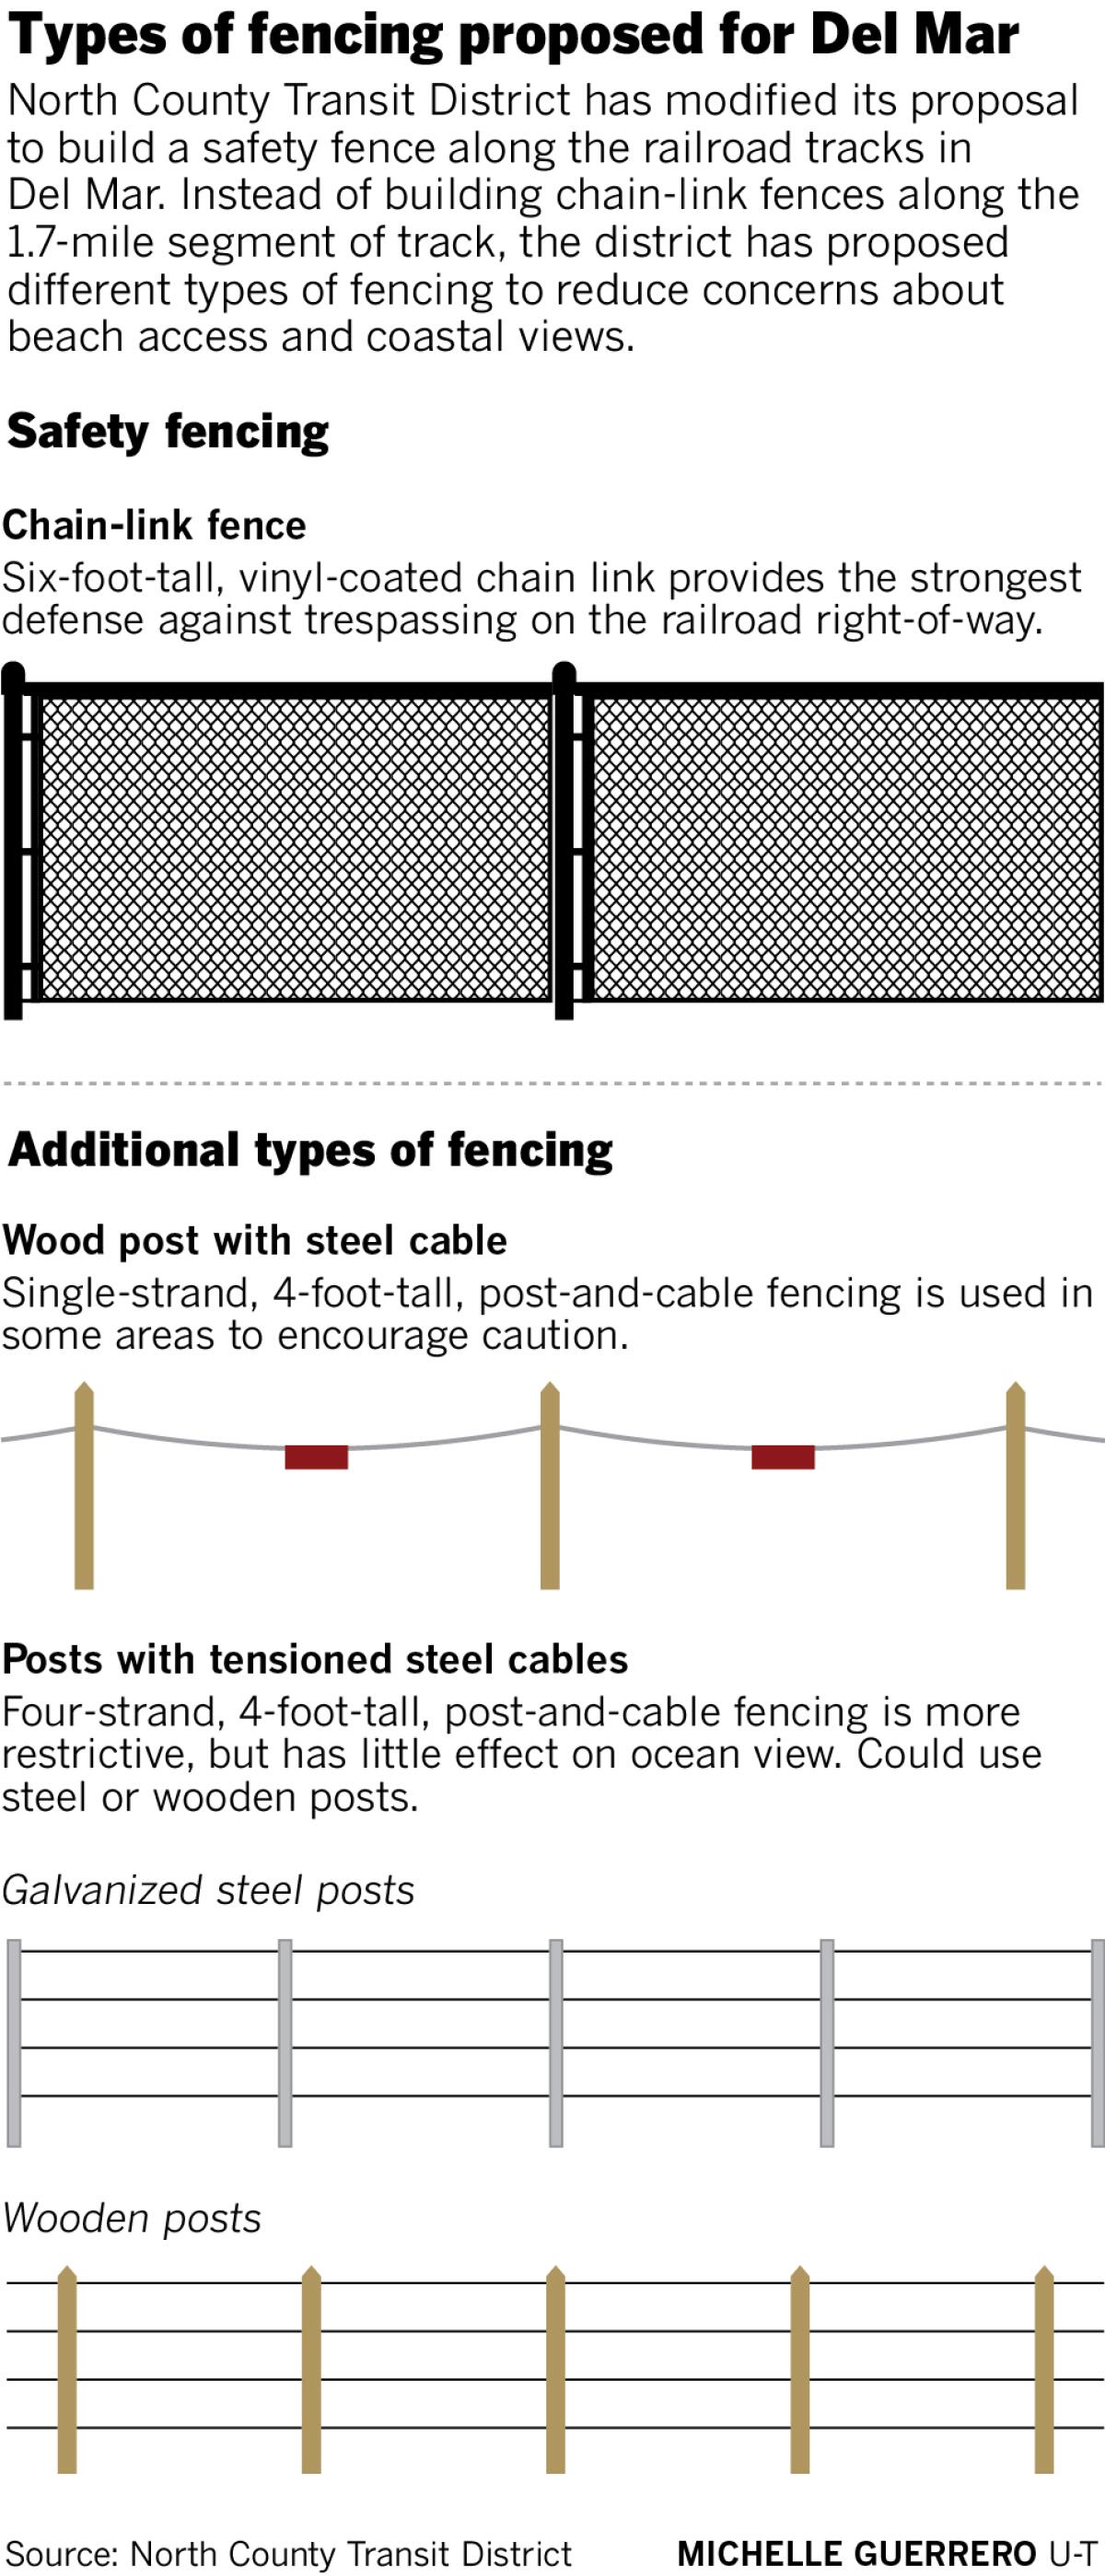 Types of fencing proposed for Del Mar